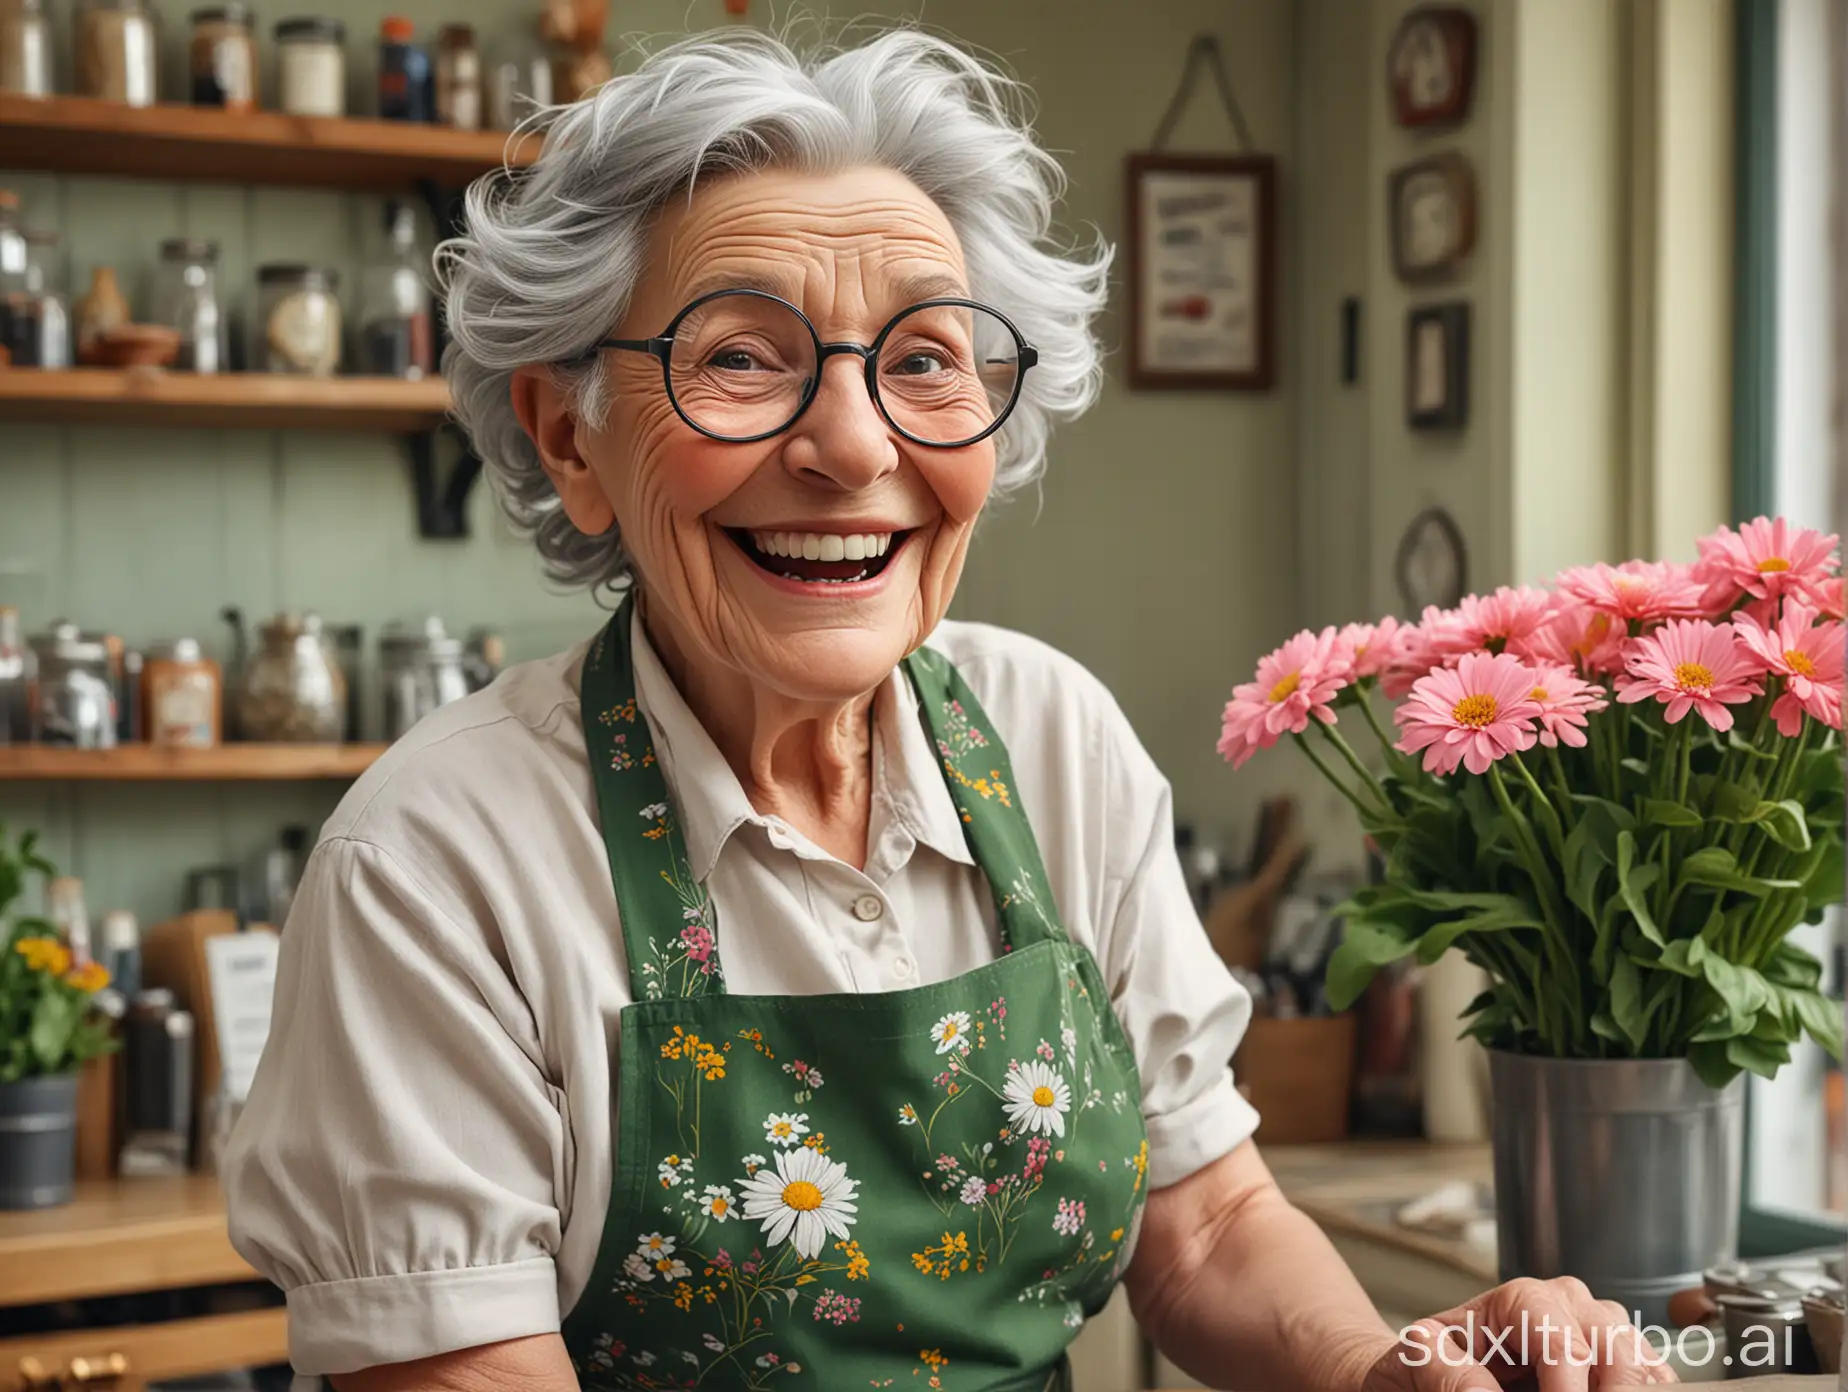 Eccentric-Elderly-Florist-with-Wild-Grey-Hair-and-Apron